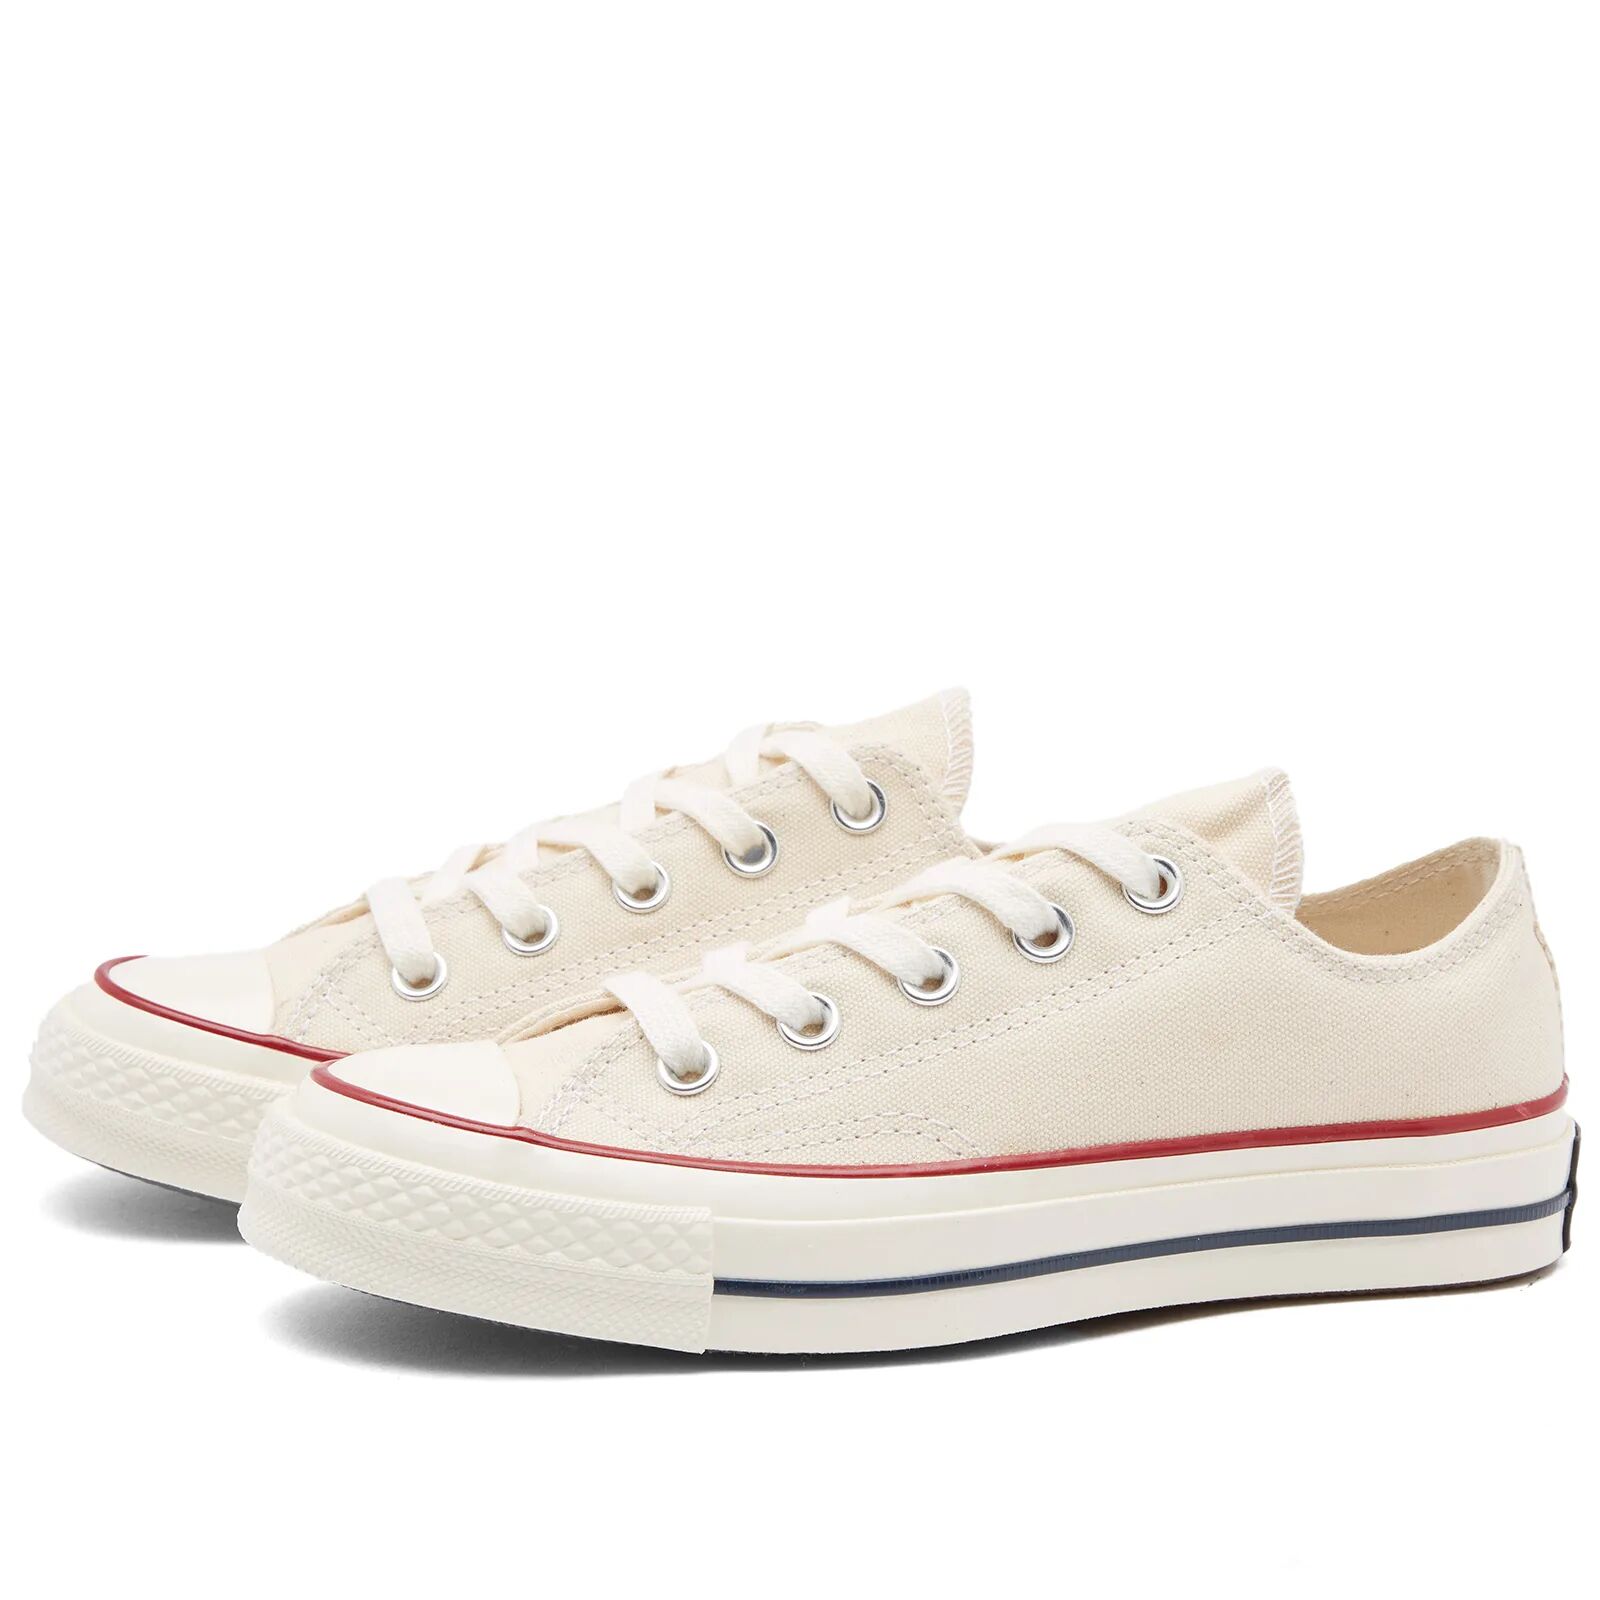 Converse Chuck Taylor 1970s Ox Sneakers in Parchment/Garnet/Egret, Size UK 9.5